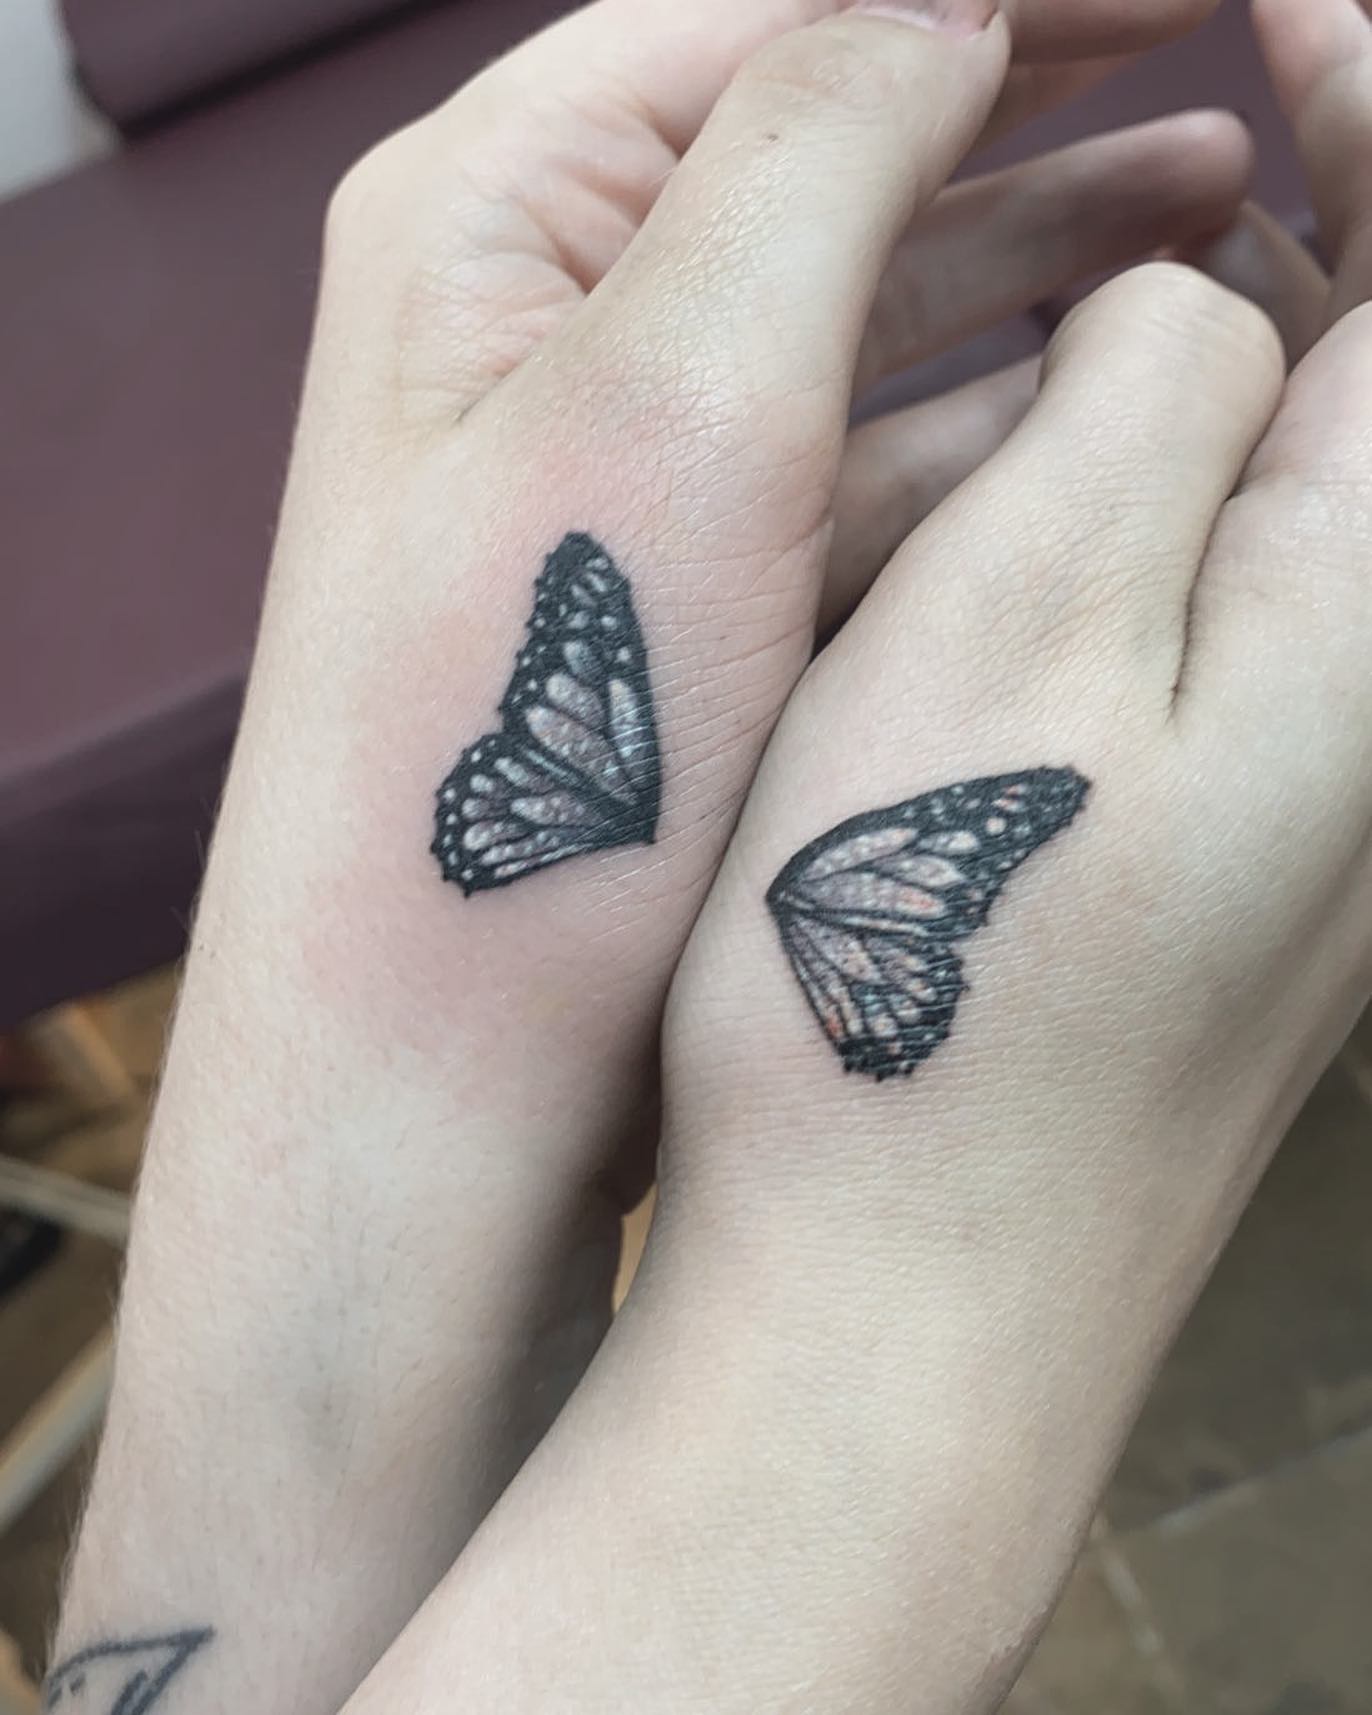 46 Red Butterfly Tattoo Designs with Meanings That Will Amaze You